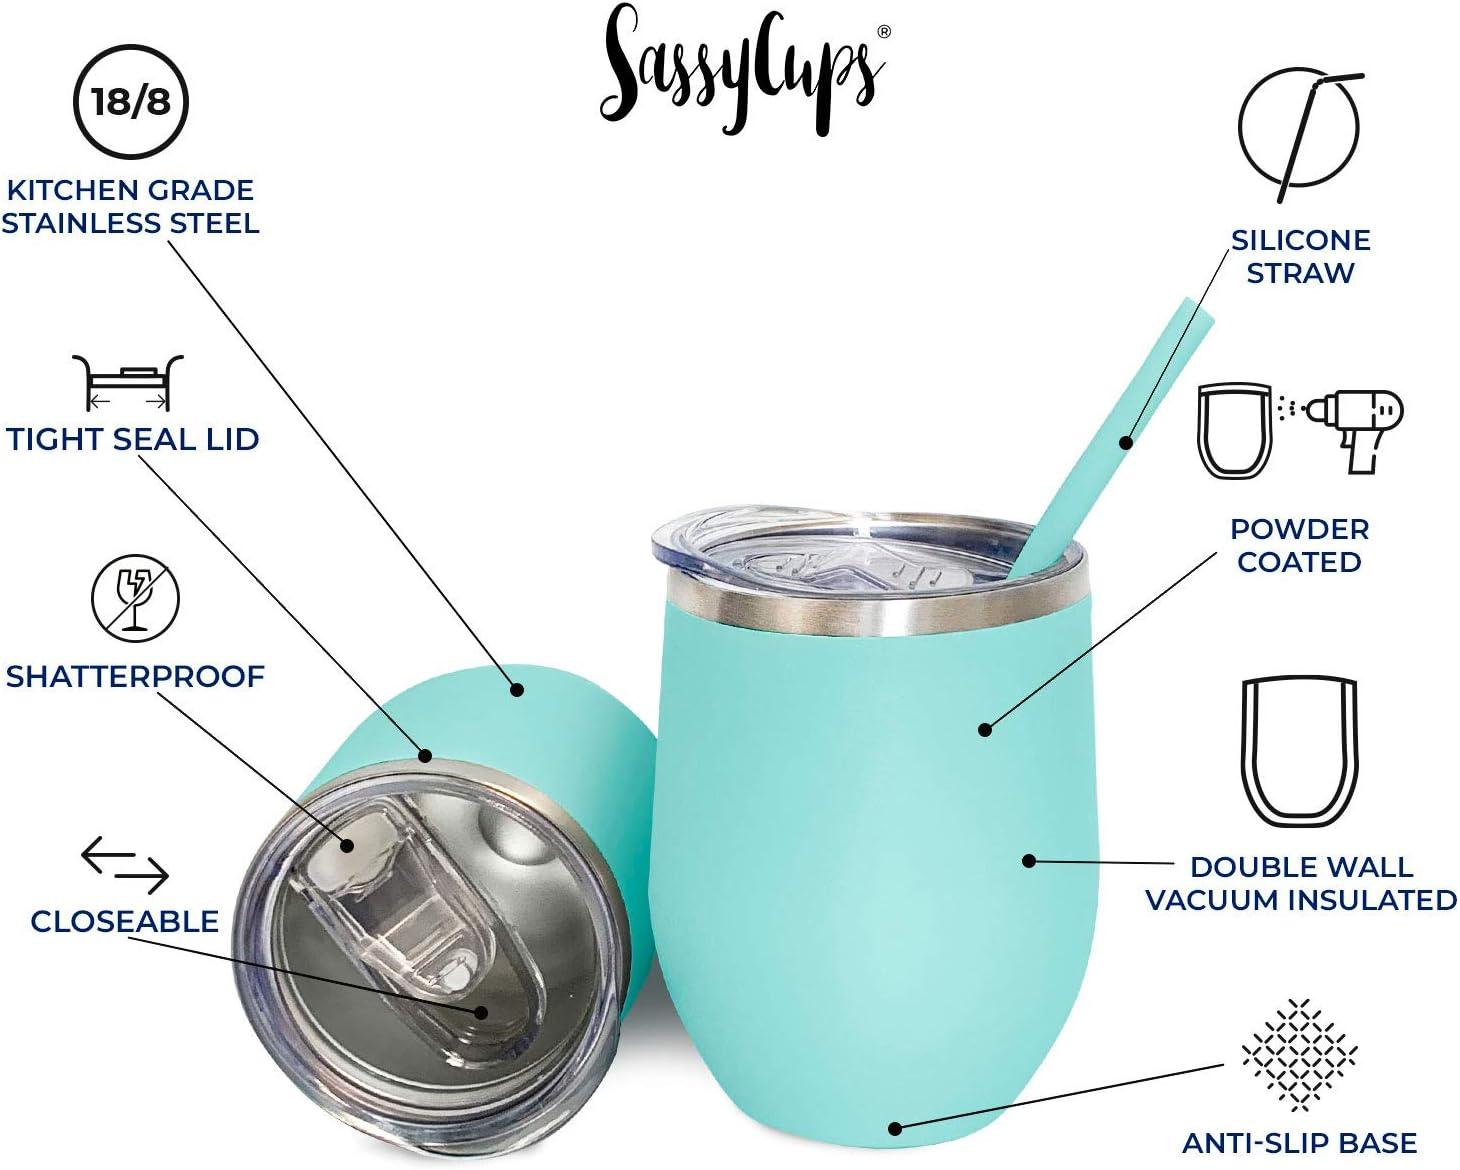 Gtmileo Daddys and Mommys Sippy Cup Stainless Steel Insulated